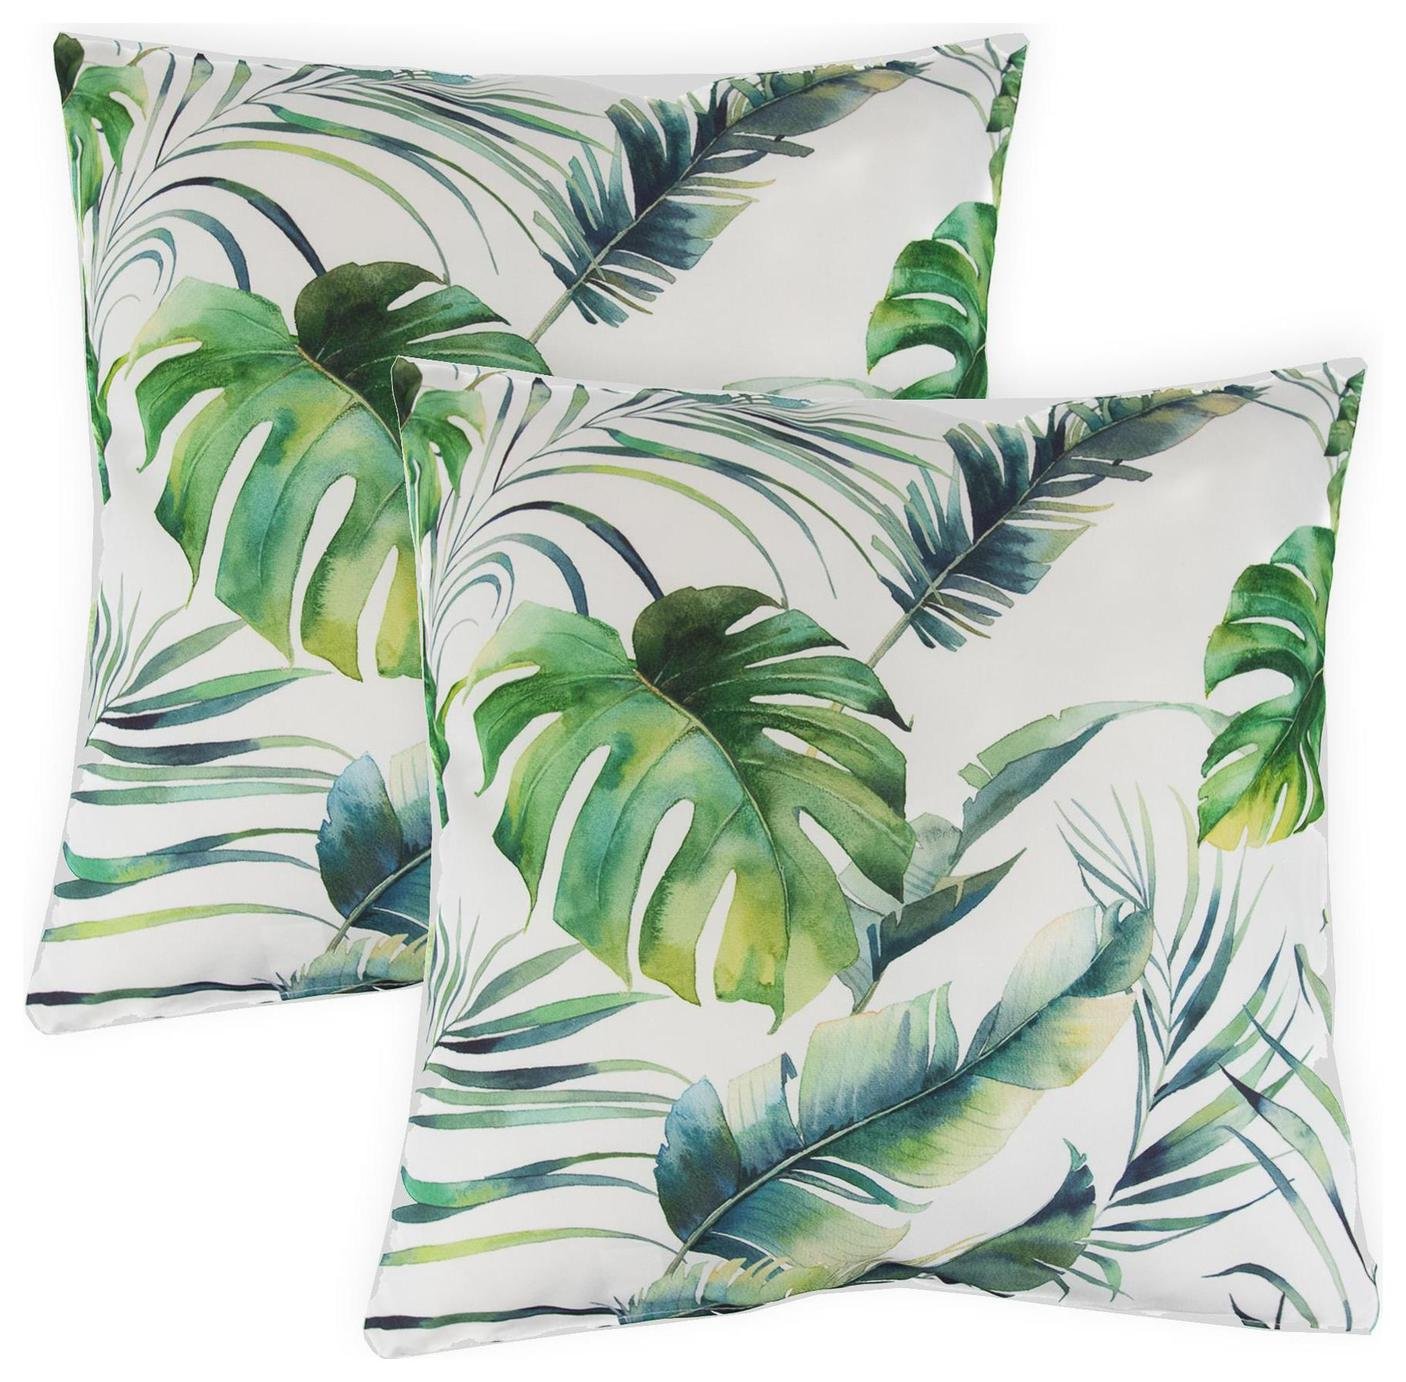 Streetwize Botanical Leaf Printed Outdoor Cushion-Pack of 4